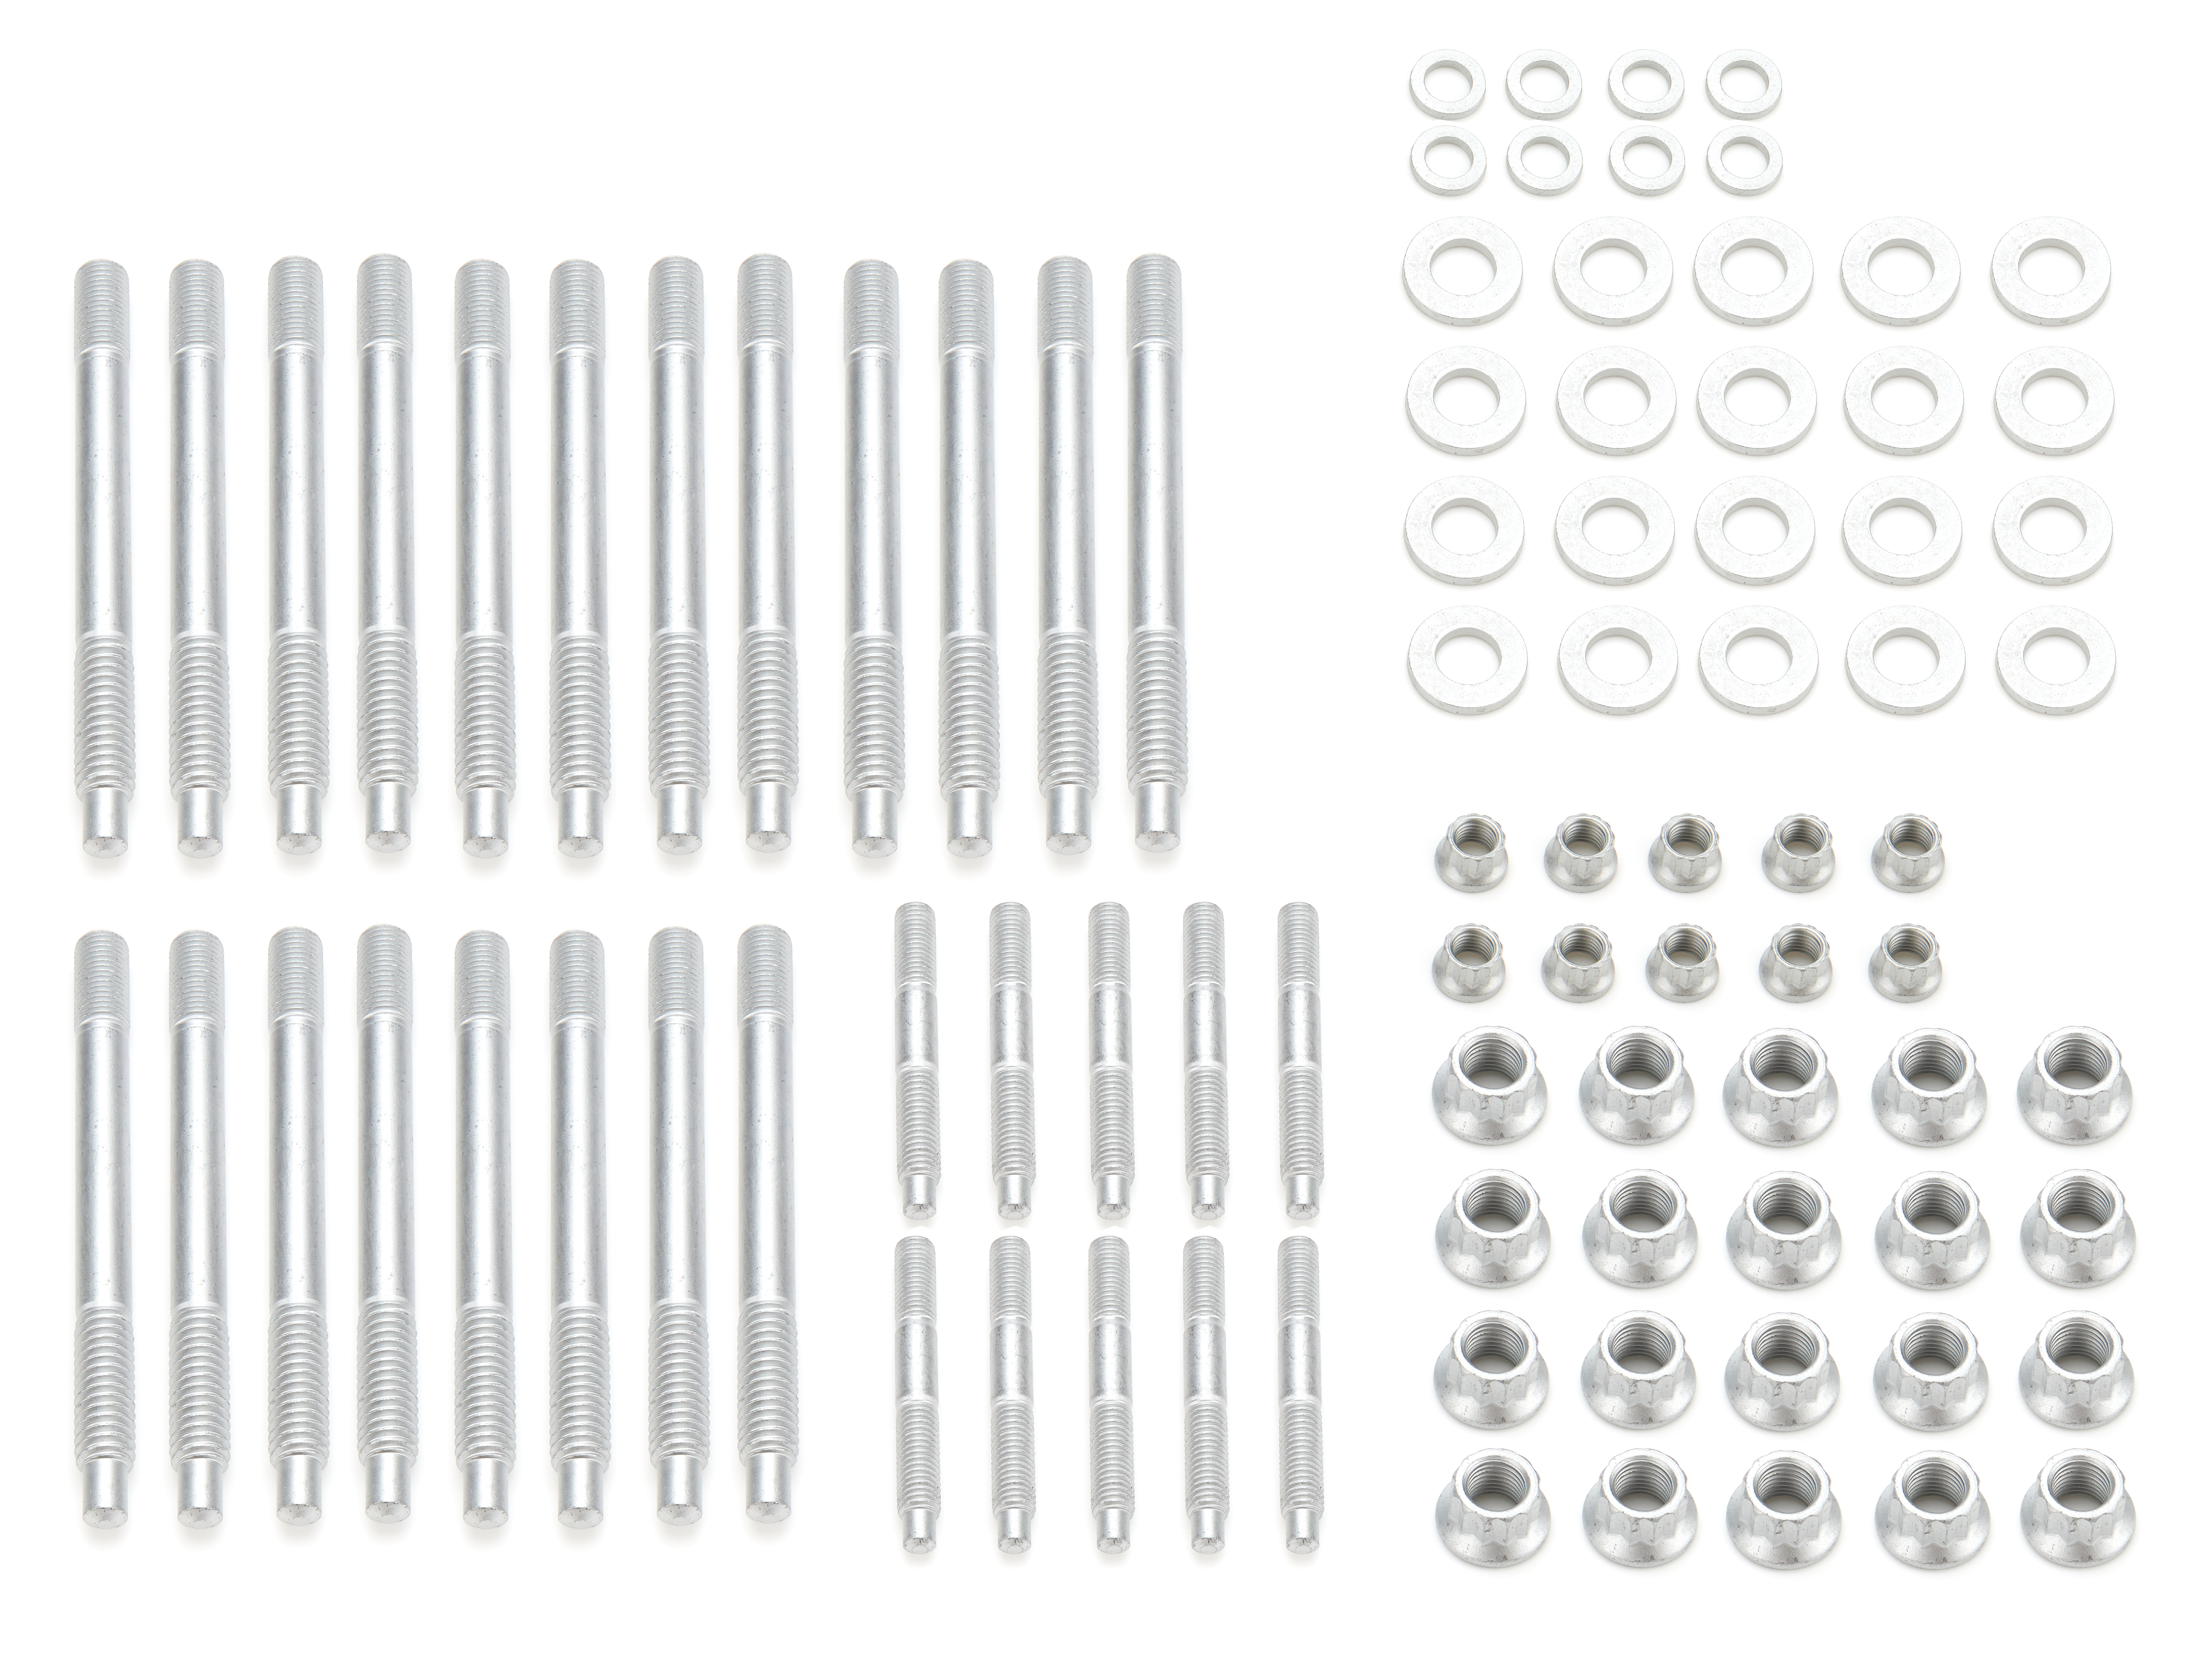 Enginequest HS294NB Cylinder Head Stud Kit, 7/16-20 in / 5/16-24 in Studs, 12 Point Nuts, Steel, Zinc Oxide, GM LS-Series 2004-07, Kit